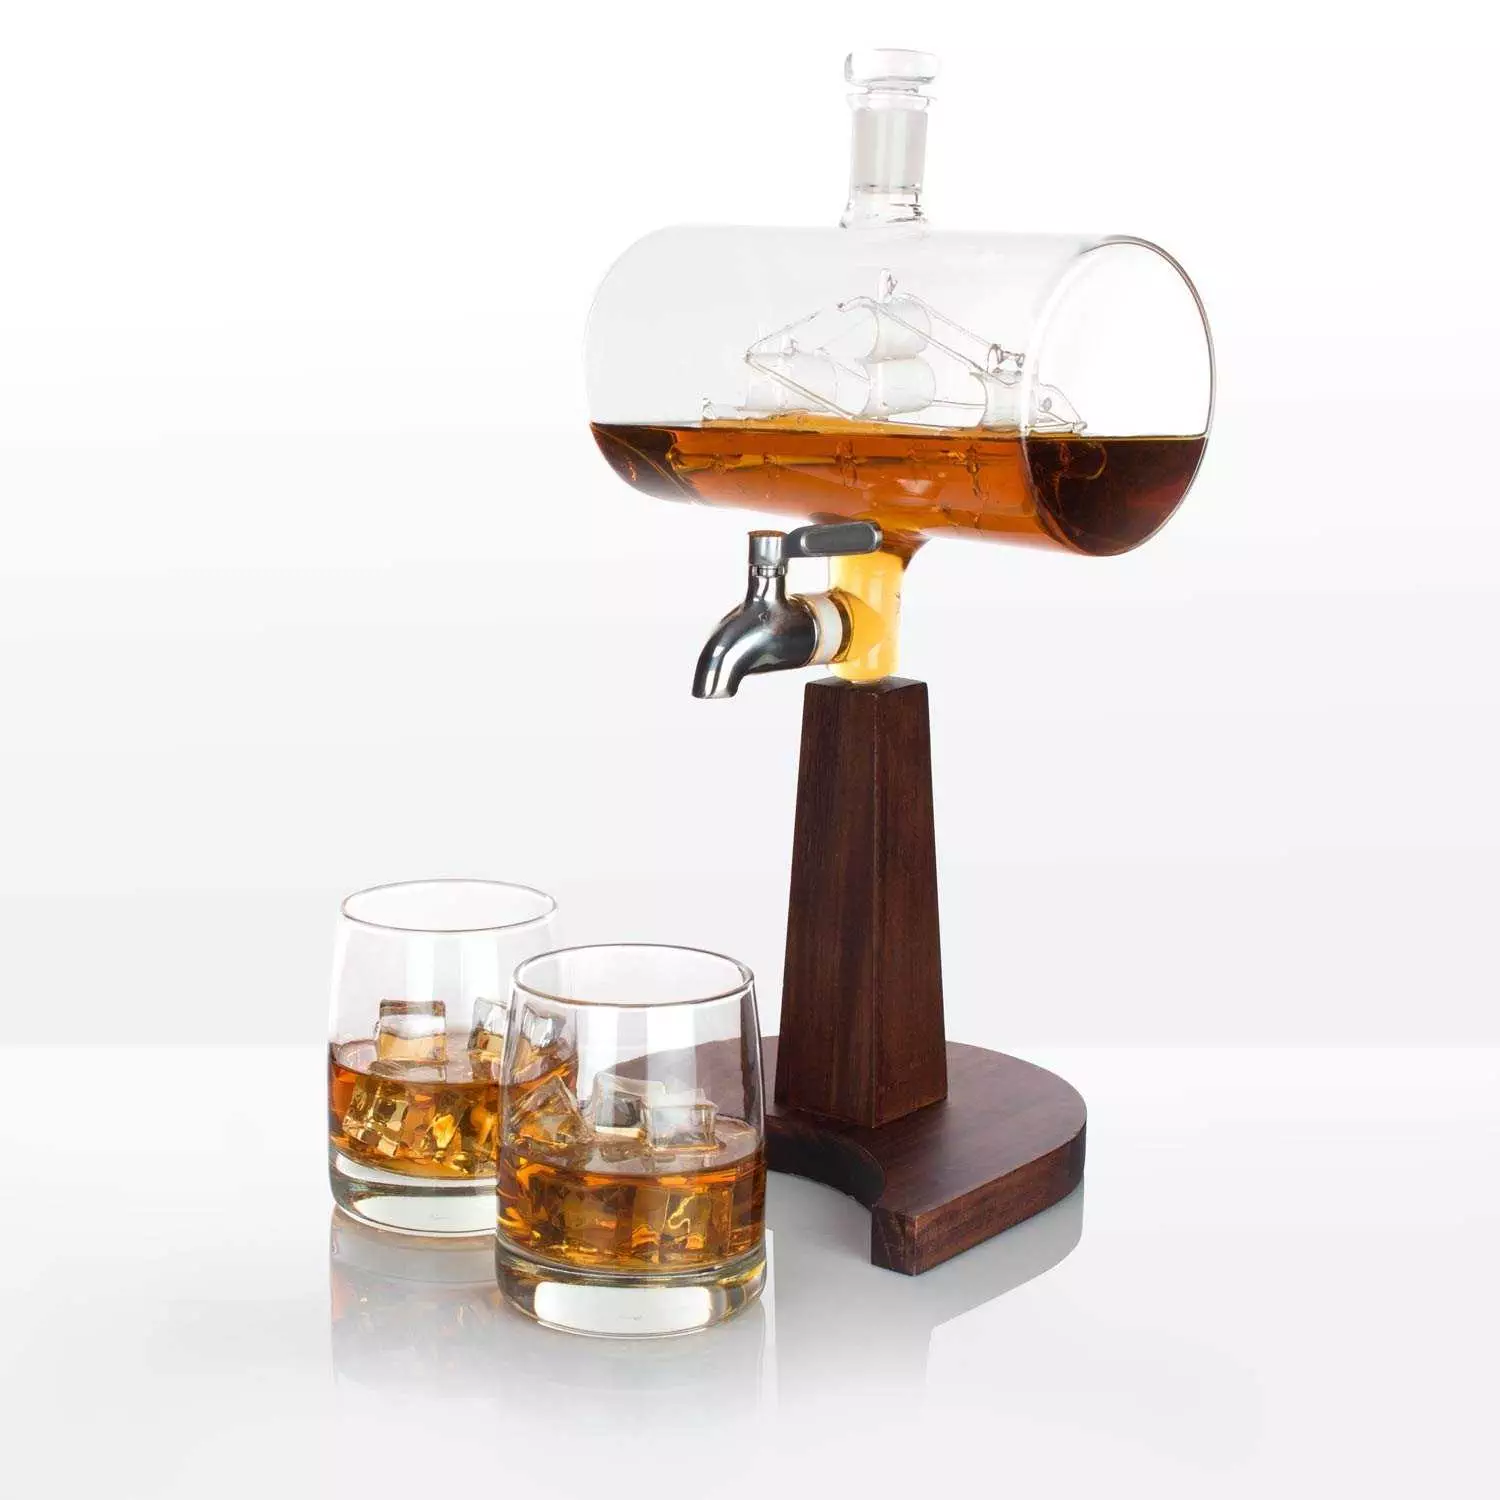 Ship Whiskey Decanter To Enjoy Whiskey In Style